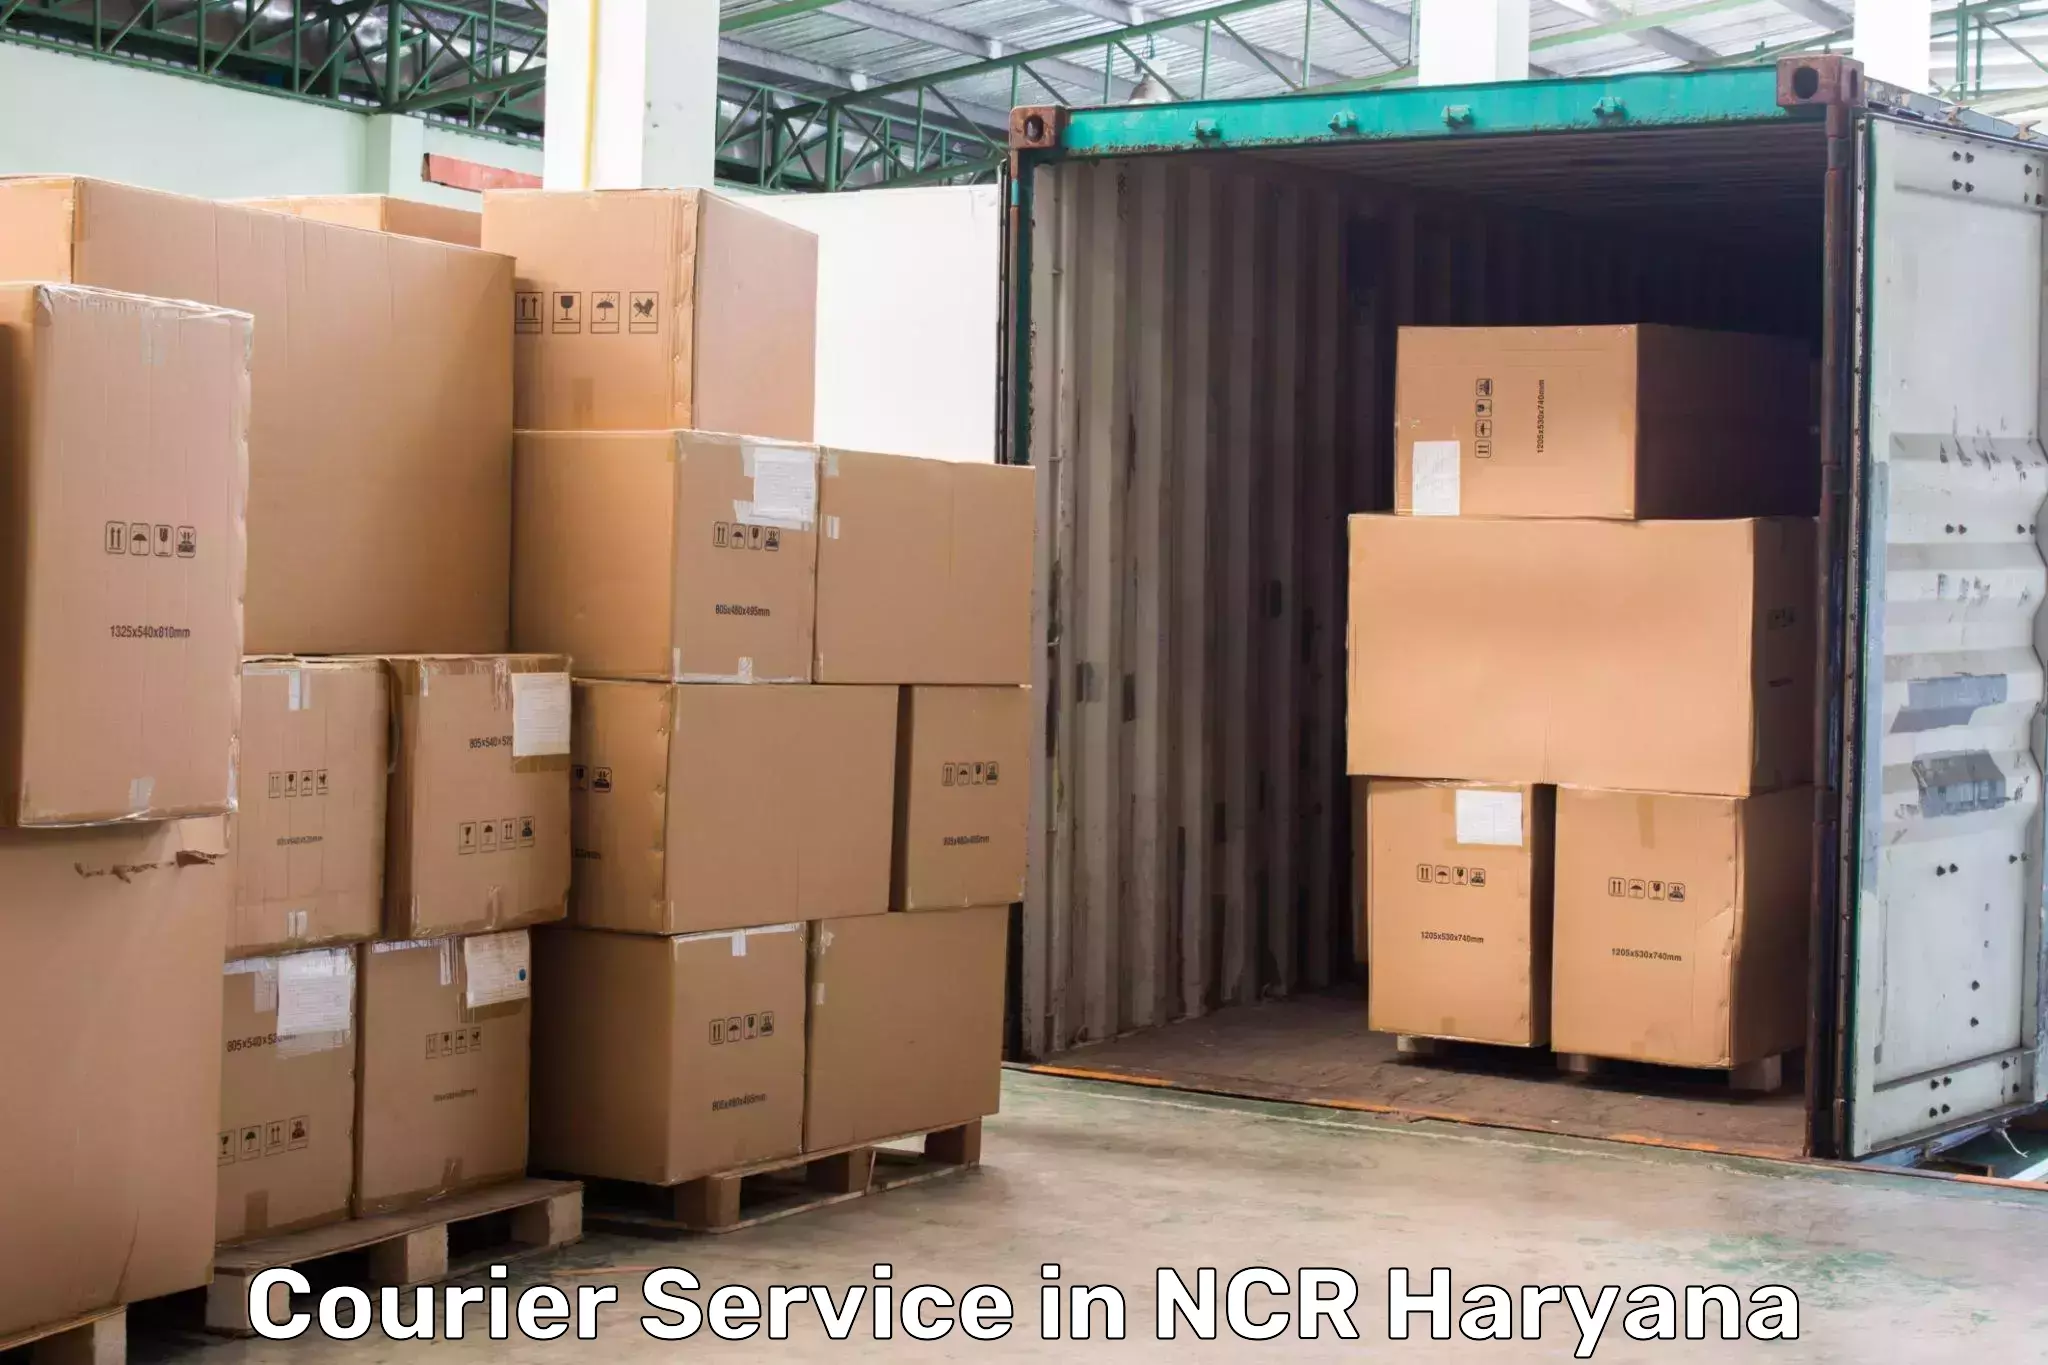 Air courier services in NCR Haryana